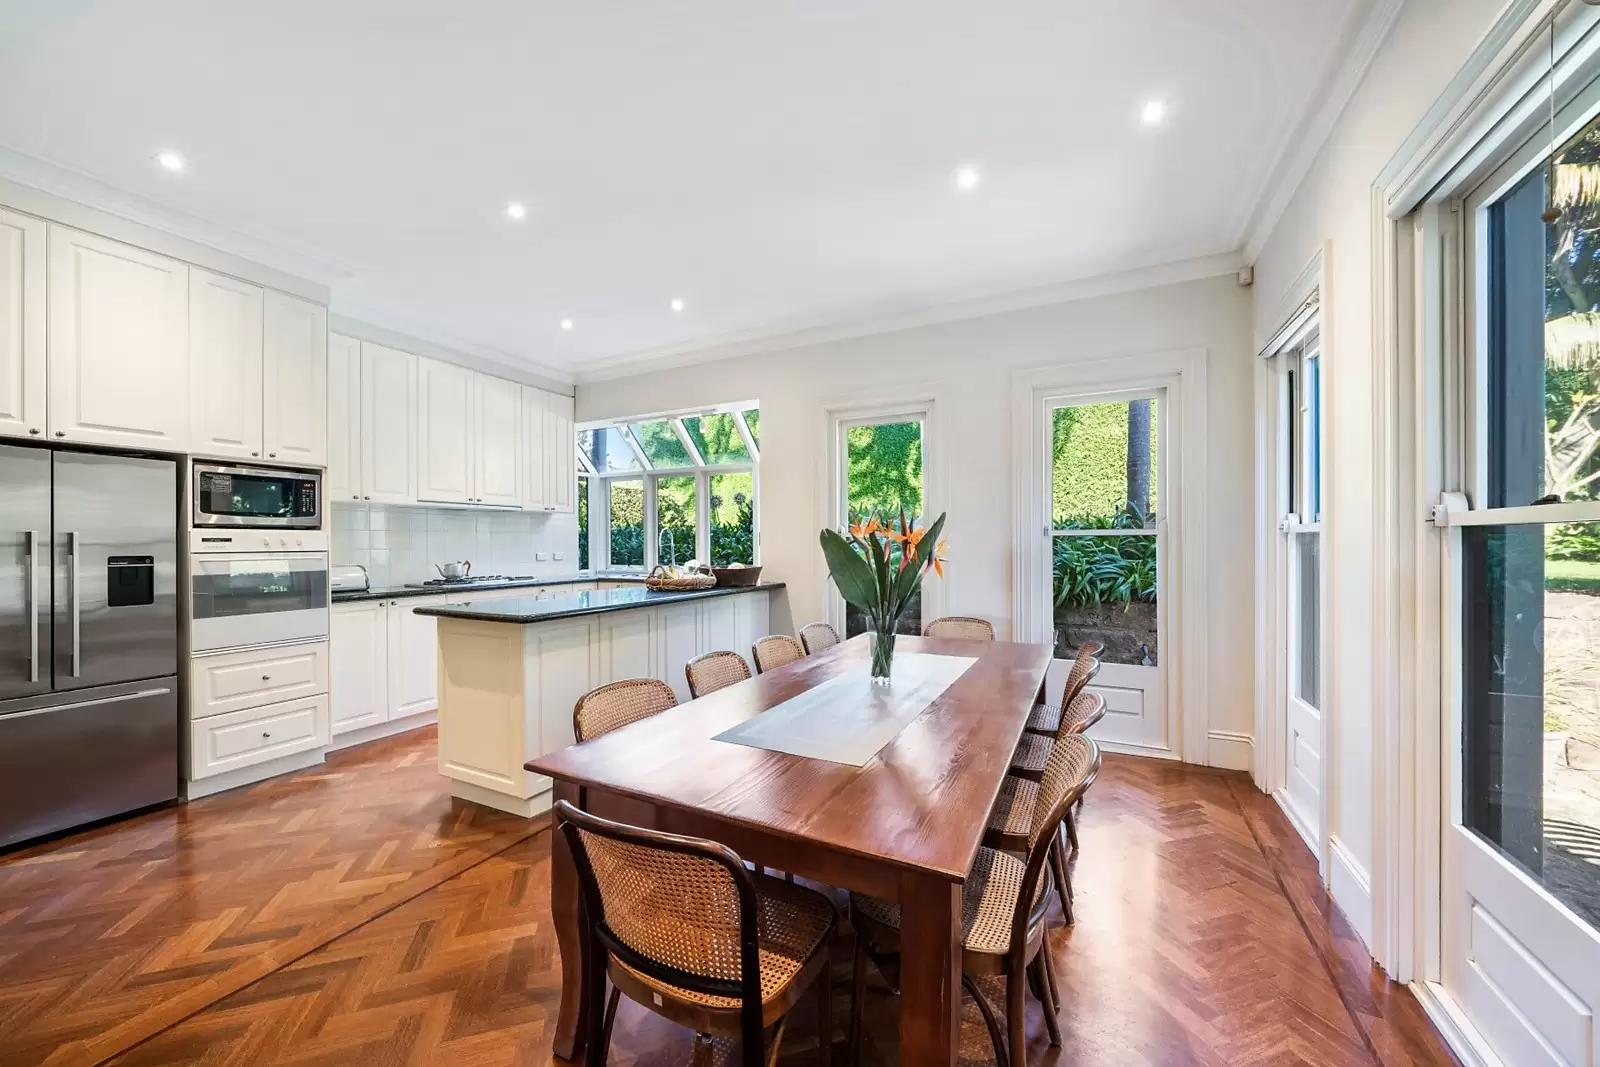 Photo #21: 33 Olphert Avenue, Vaucluse - Sold by Sydney Sotheby's International Realty